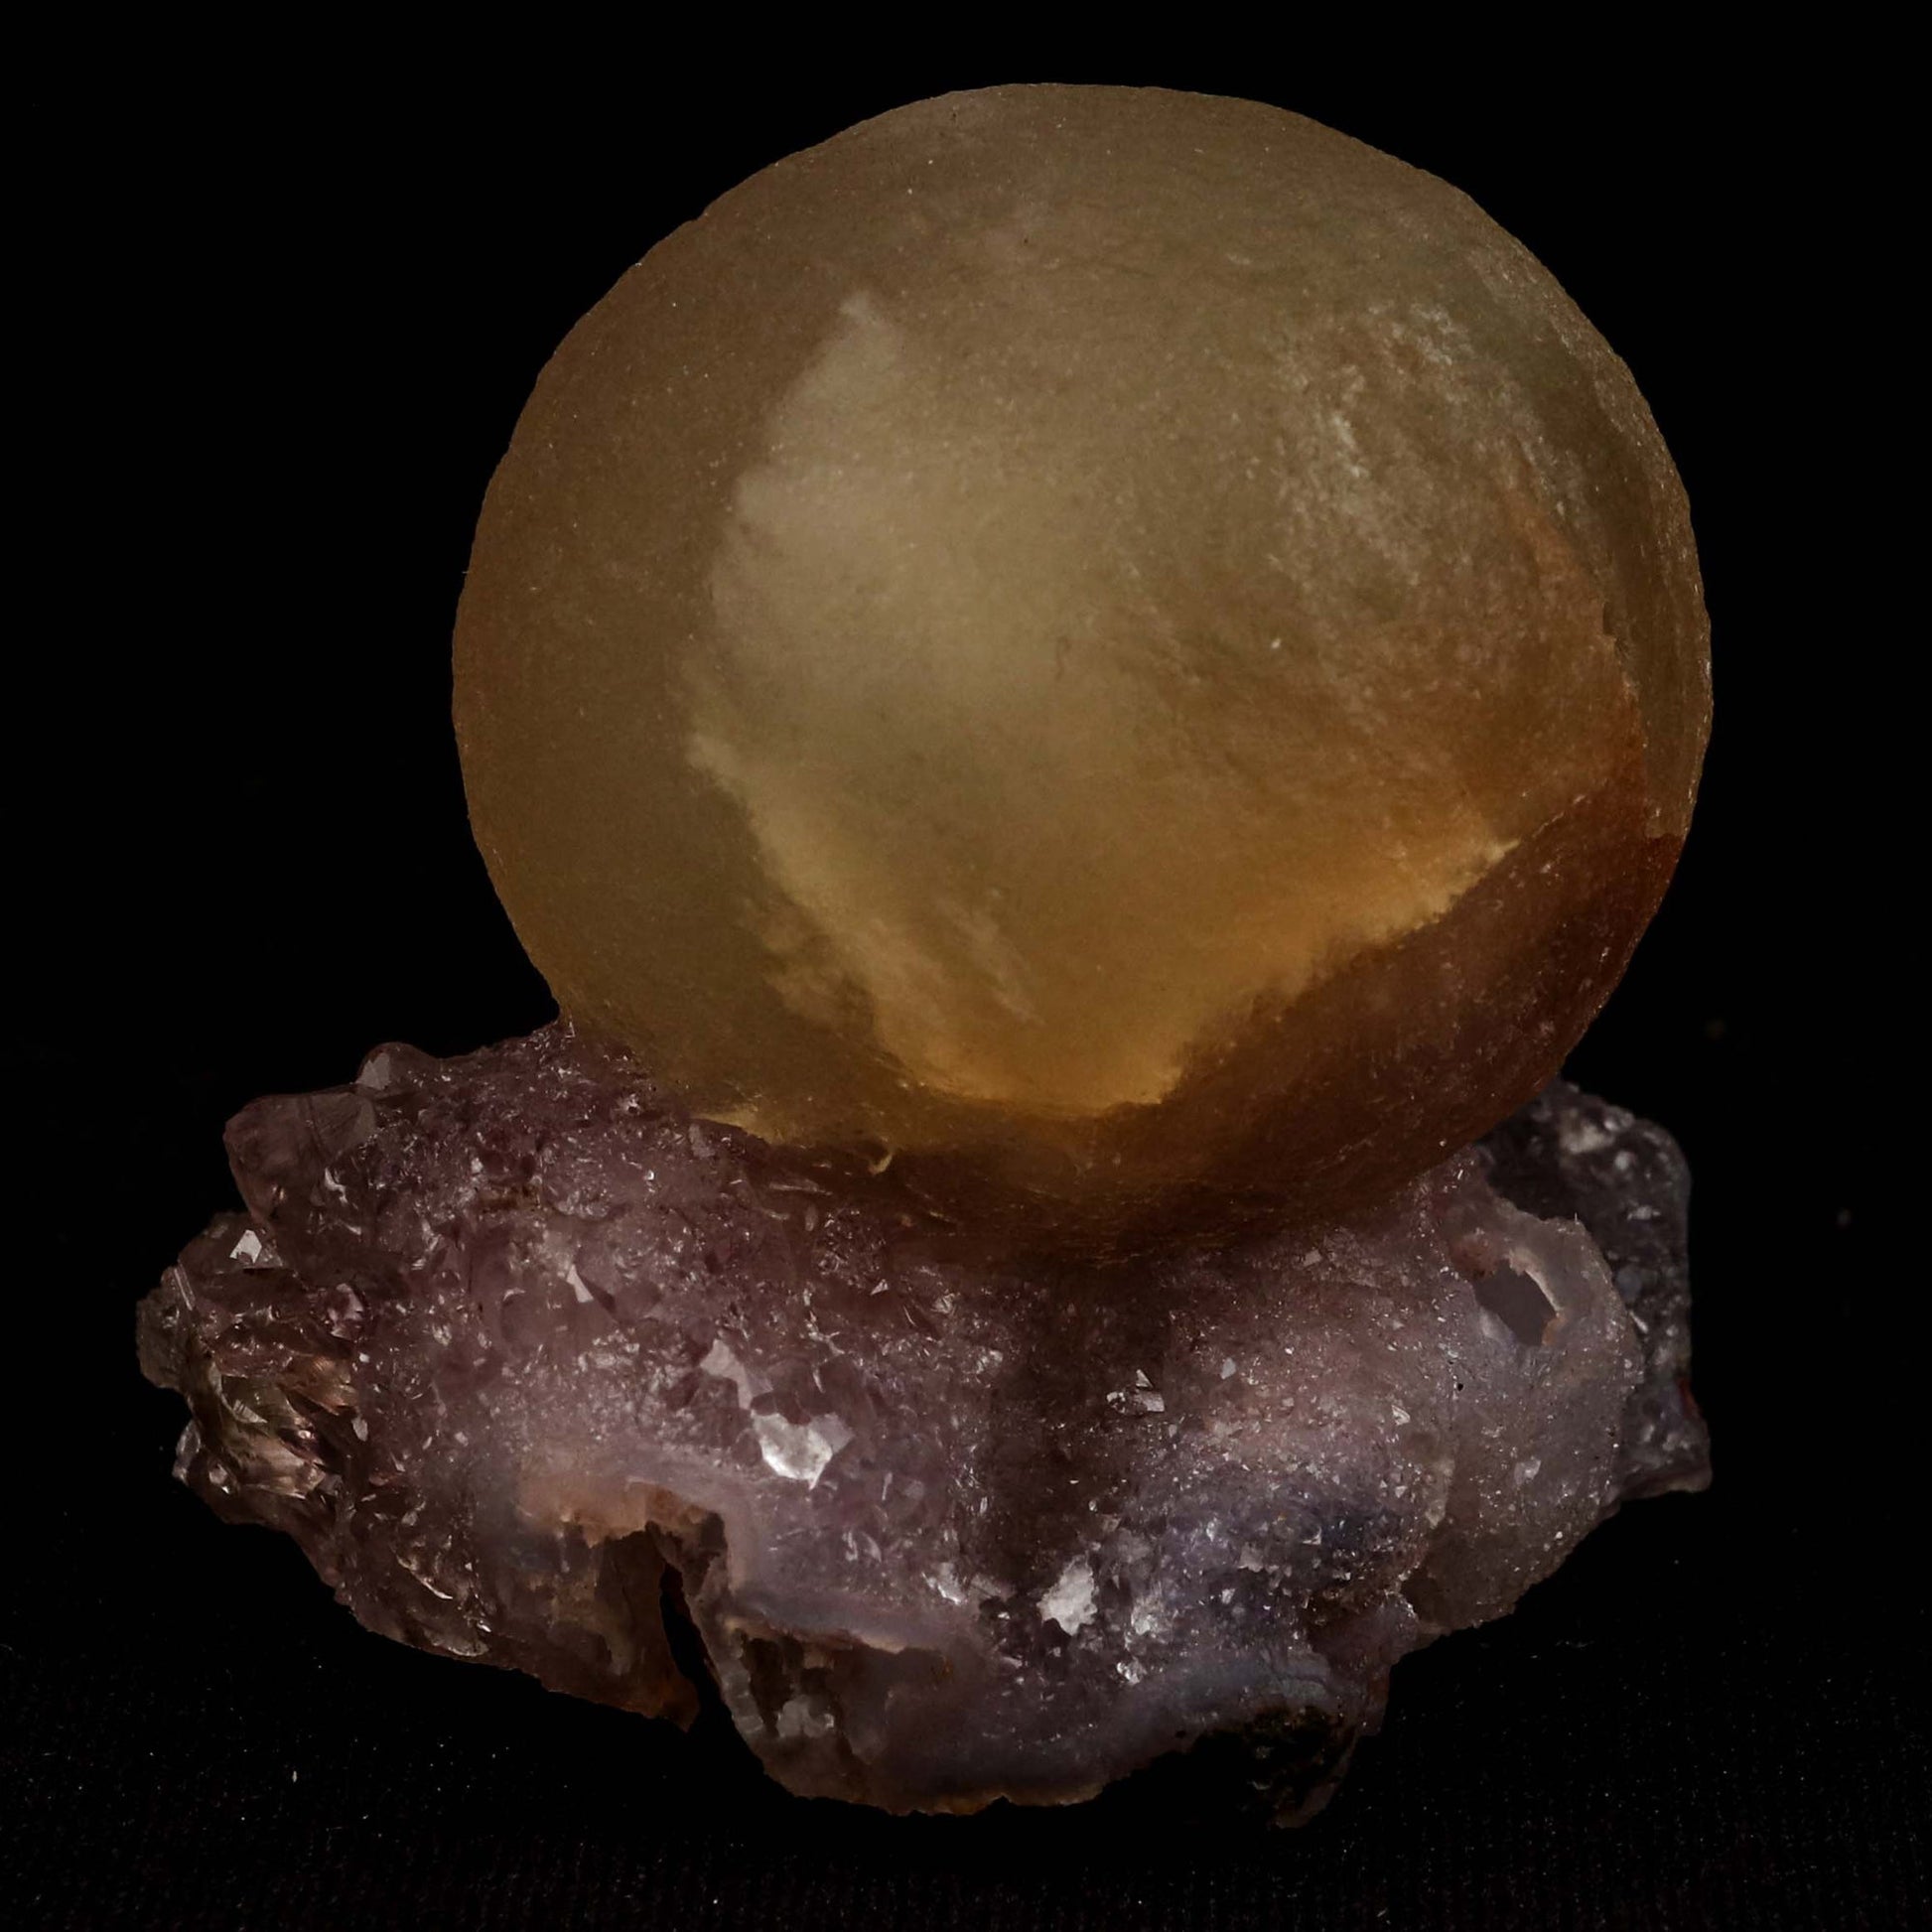 Fluorite Botridoal on Amethyst Natural Mineral Specimen # B 5194  https://www.superbminerals.us/products/fluorite-botridoal-on-amethyst-natural-mineral-specimen-b-5194  Features: An extremely botryoidal "ball" of Fluorite perches above an incredibly rich purple-colored Amethyst on Chalcedony and host rock matrix, resulting in an unusually stunning specimen. The Fluorite is a creamy-white tone on the surface that gradually fades away to a golden tint in the centre.